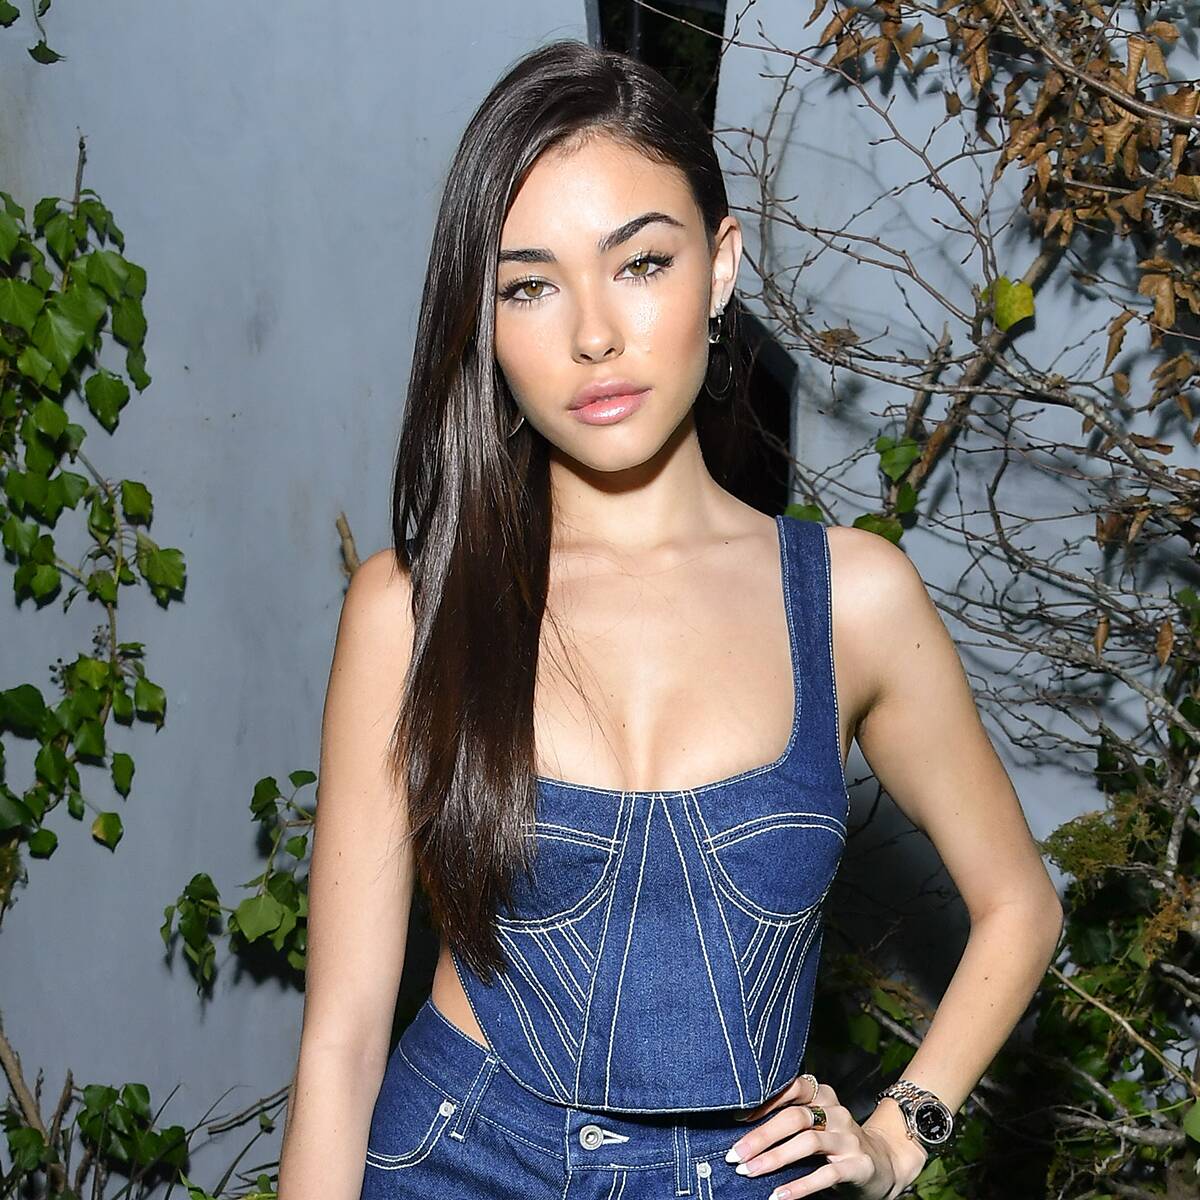 Madison Beer Recalls Feeling "Very Silenced by Older Men" in the Music Industry